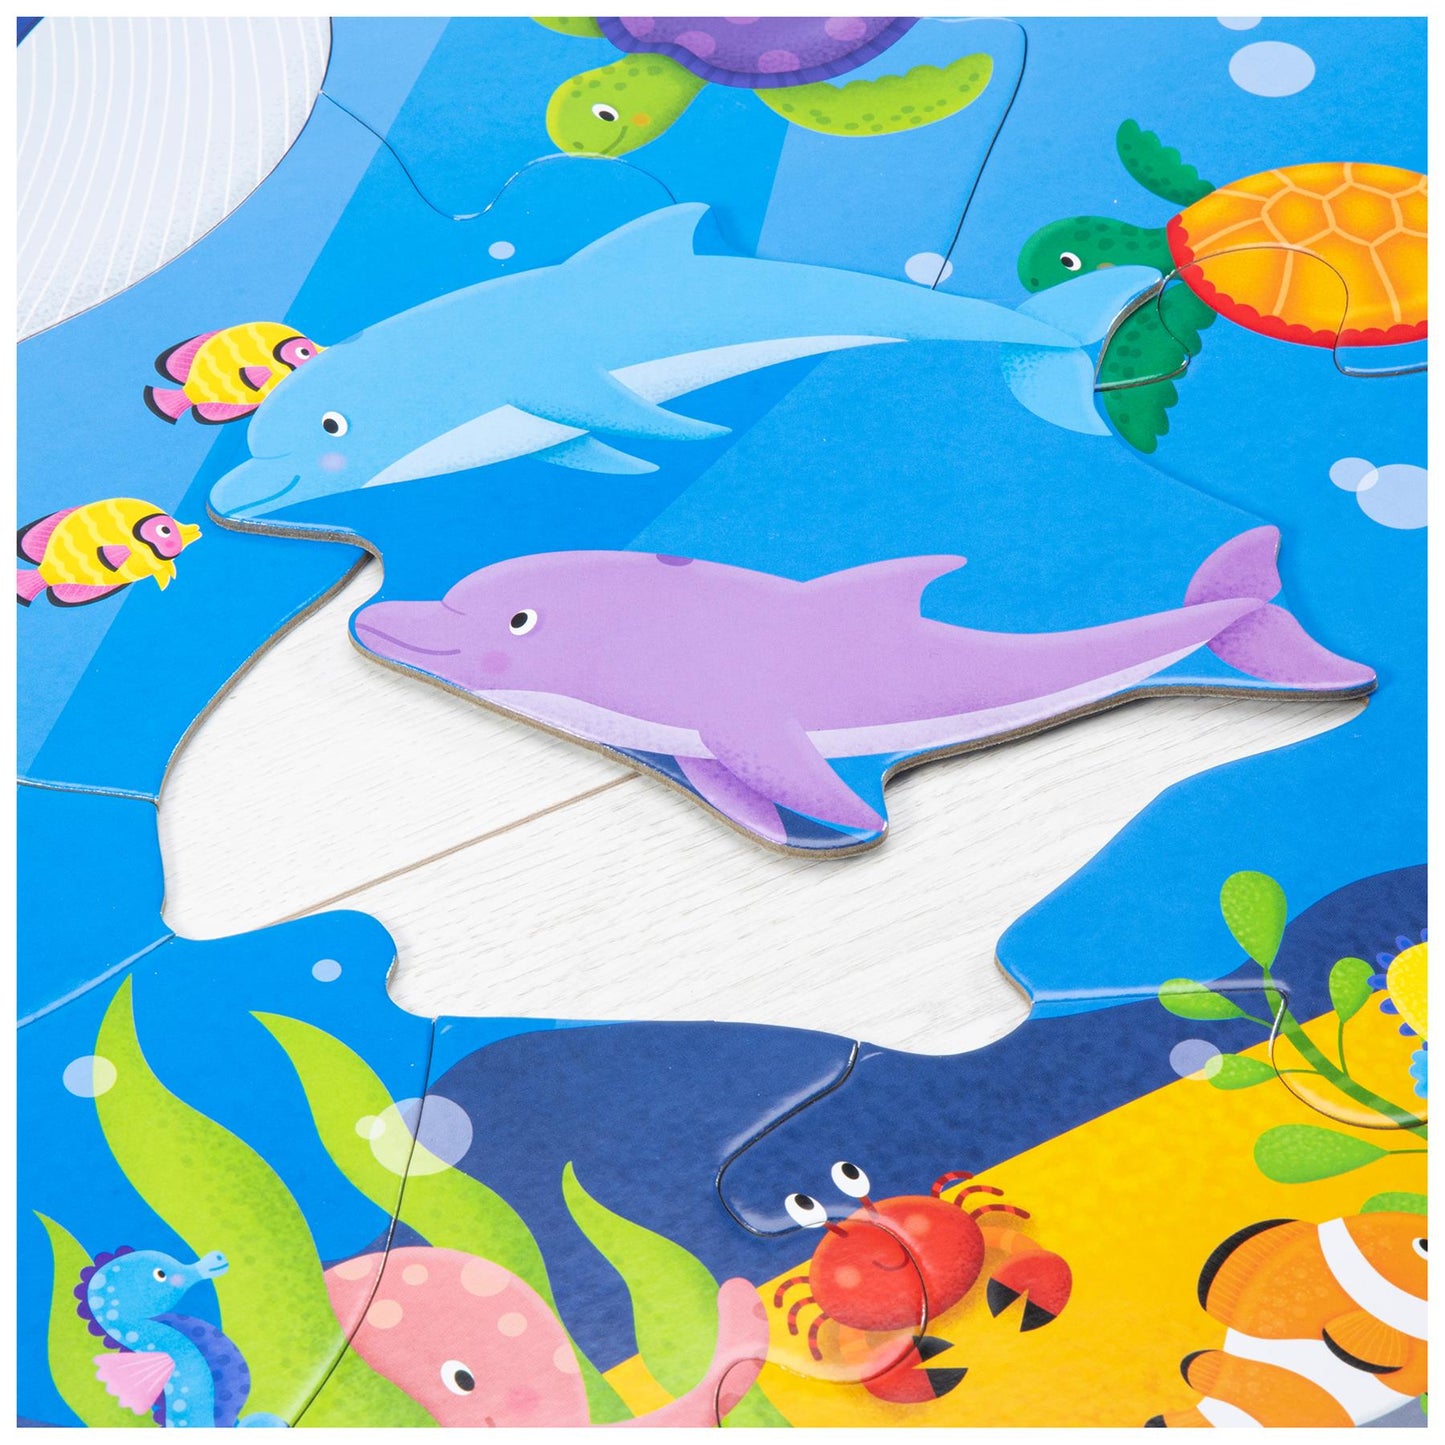 Counting Creatures  30 Piece Giant Floor Jigsaw Puzzle